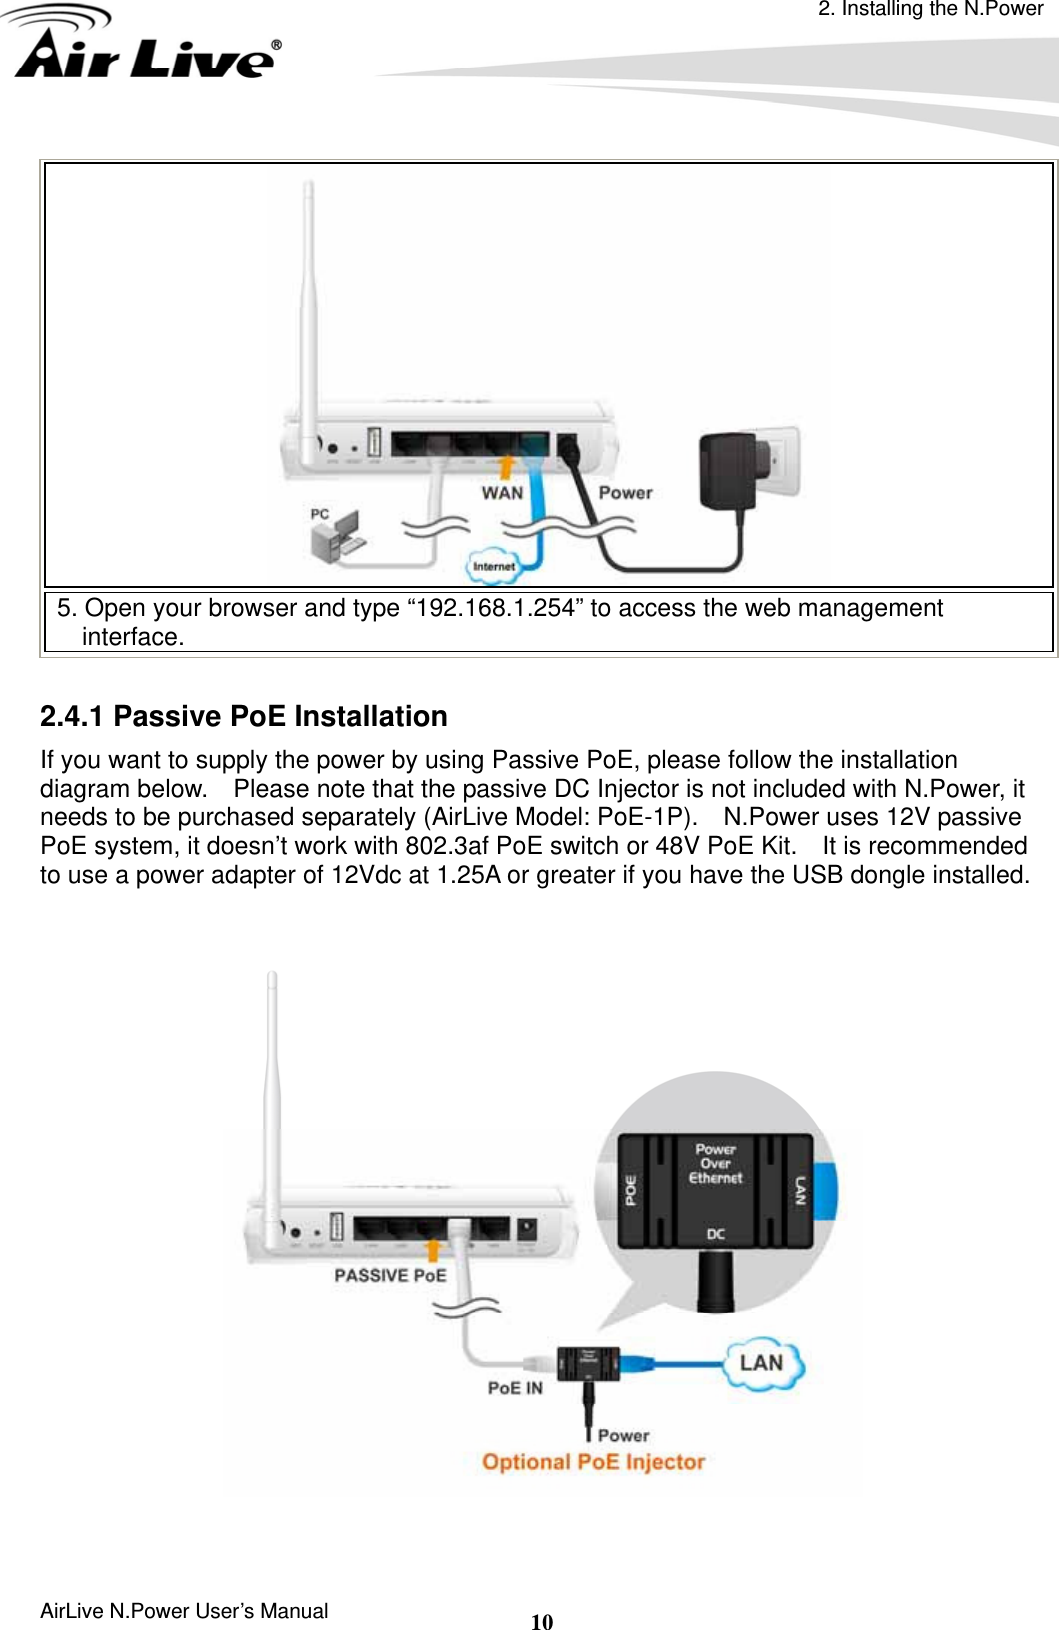 2. Installing the N.Power AirLive N.Power User’s Manual  10 5. Open your browser and type “192.168.1.254” to access the web management interface.  2.4.1 Passive PoE Installation If you want to supply the power by using Passive PoE, please follow the installation diagram below.    Please note that the passive DC Injector is not included with N.Power, it needs to be purchased separately (AirLive Model: PoE-1P).    N.Power uses 12V passive PoE system, it doesn’t work with 802.3af PoE switch or 48V PoE Kit.  It is recommended to use a power adapter of 12Vdc at 1.25A or greater if you have the USB dongle installed.       